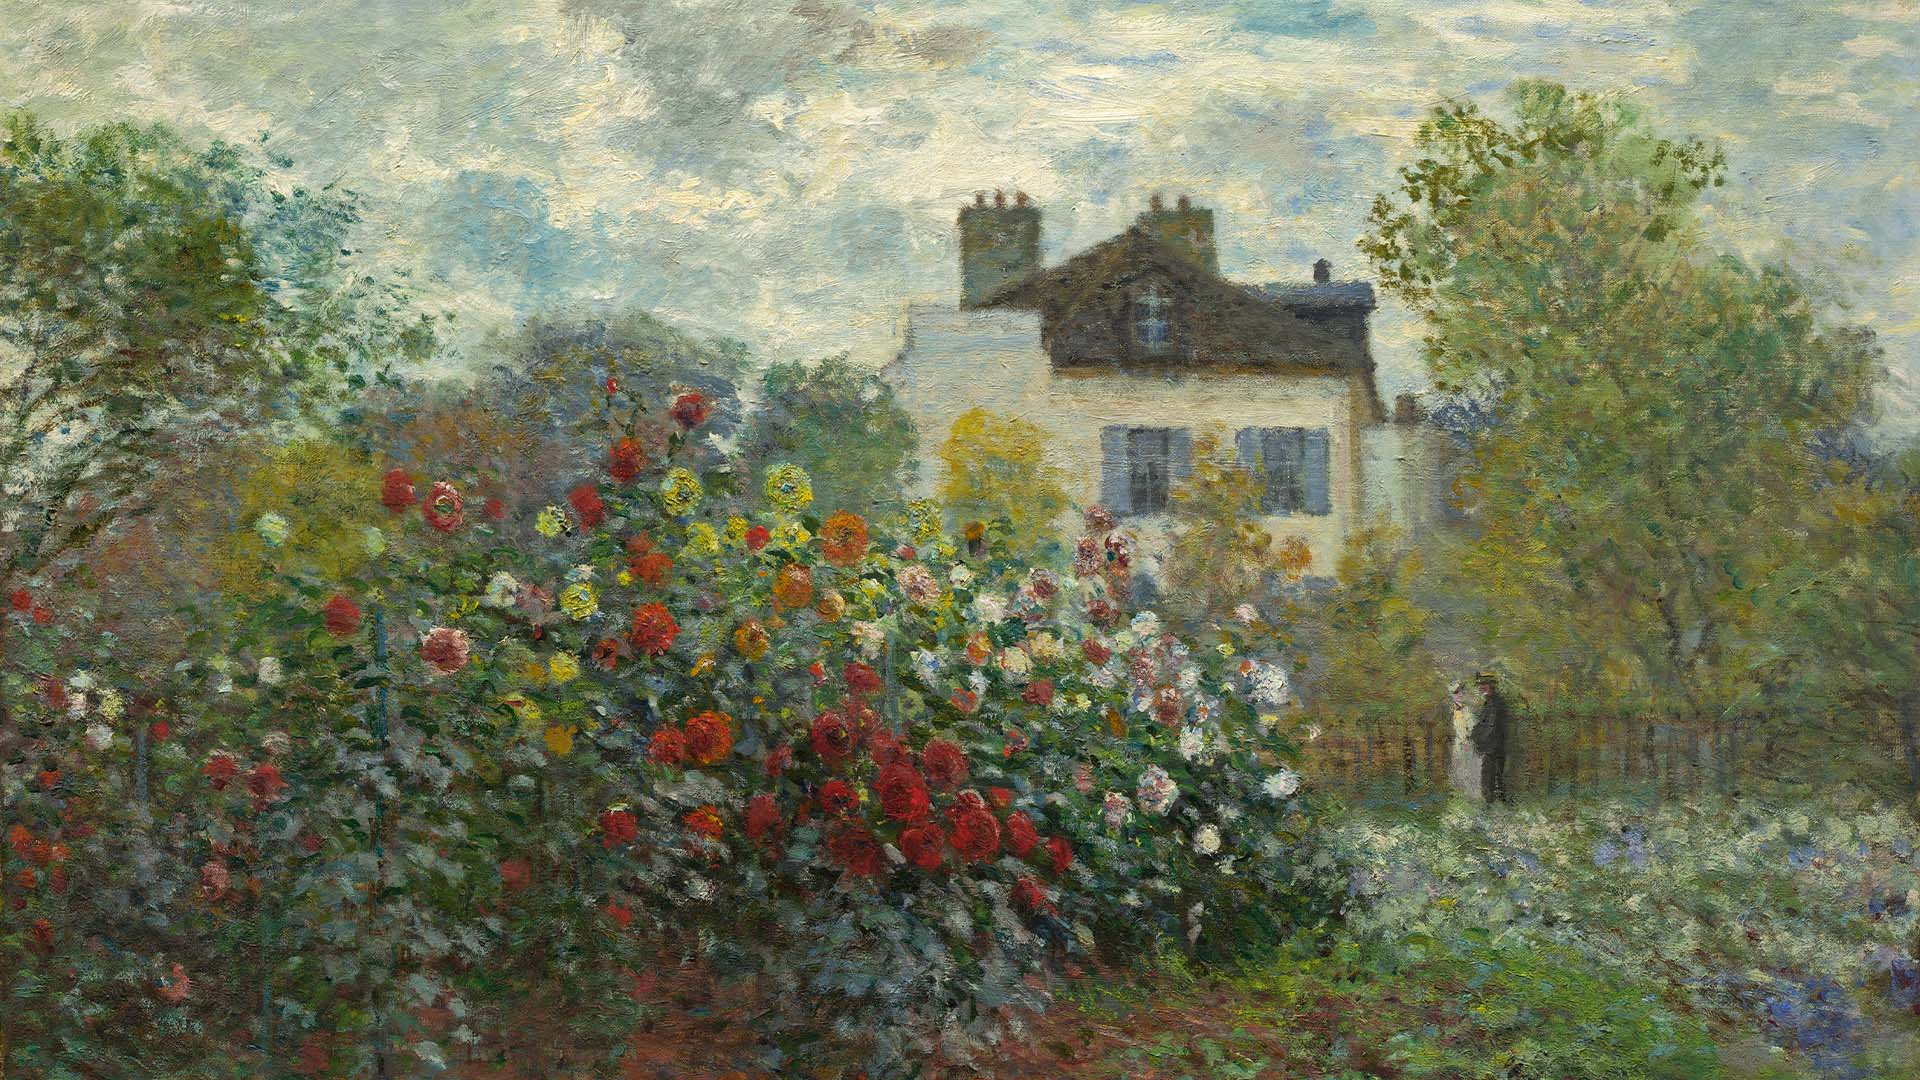 Exhibition On Screen: Painting The Modern Garden – Monet To Matisse